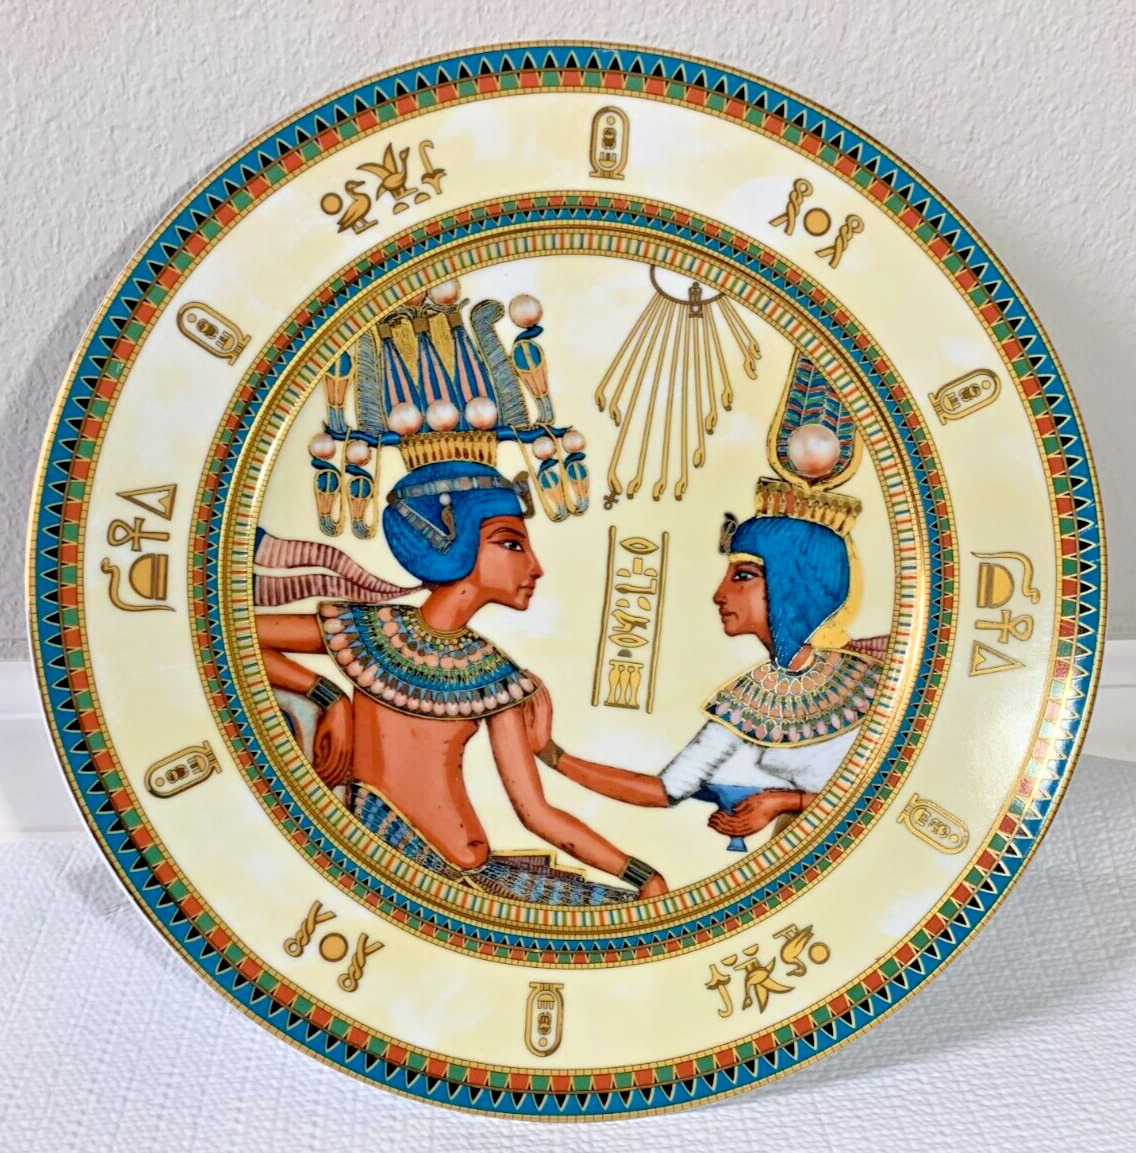 12 1/2” LIMOGES Fathi Mahmoud Round 1942 Gold Pharoh Sculpture Plate made -Egypt